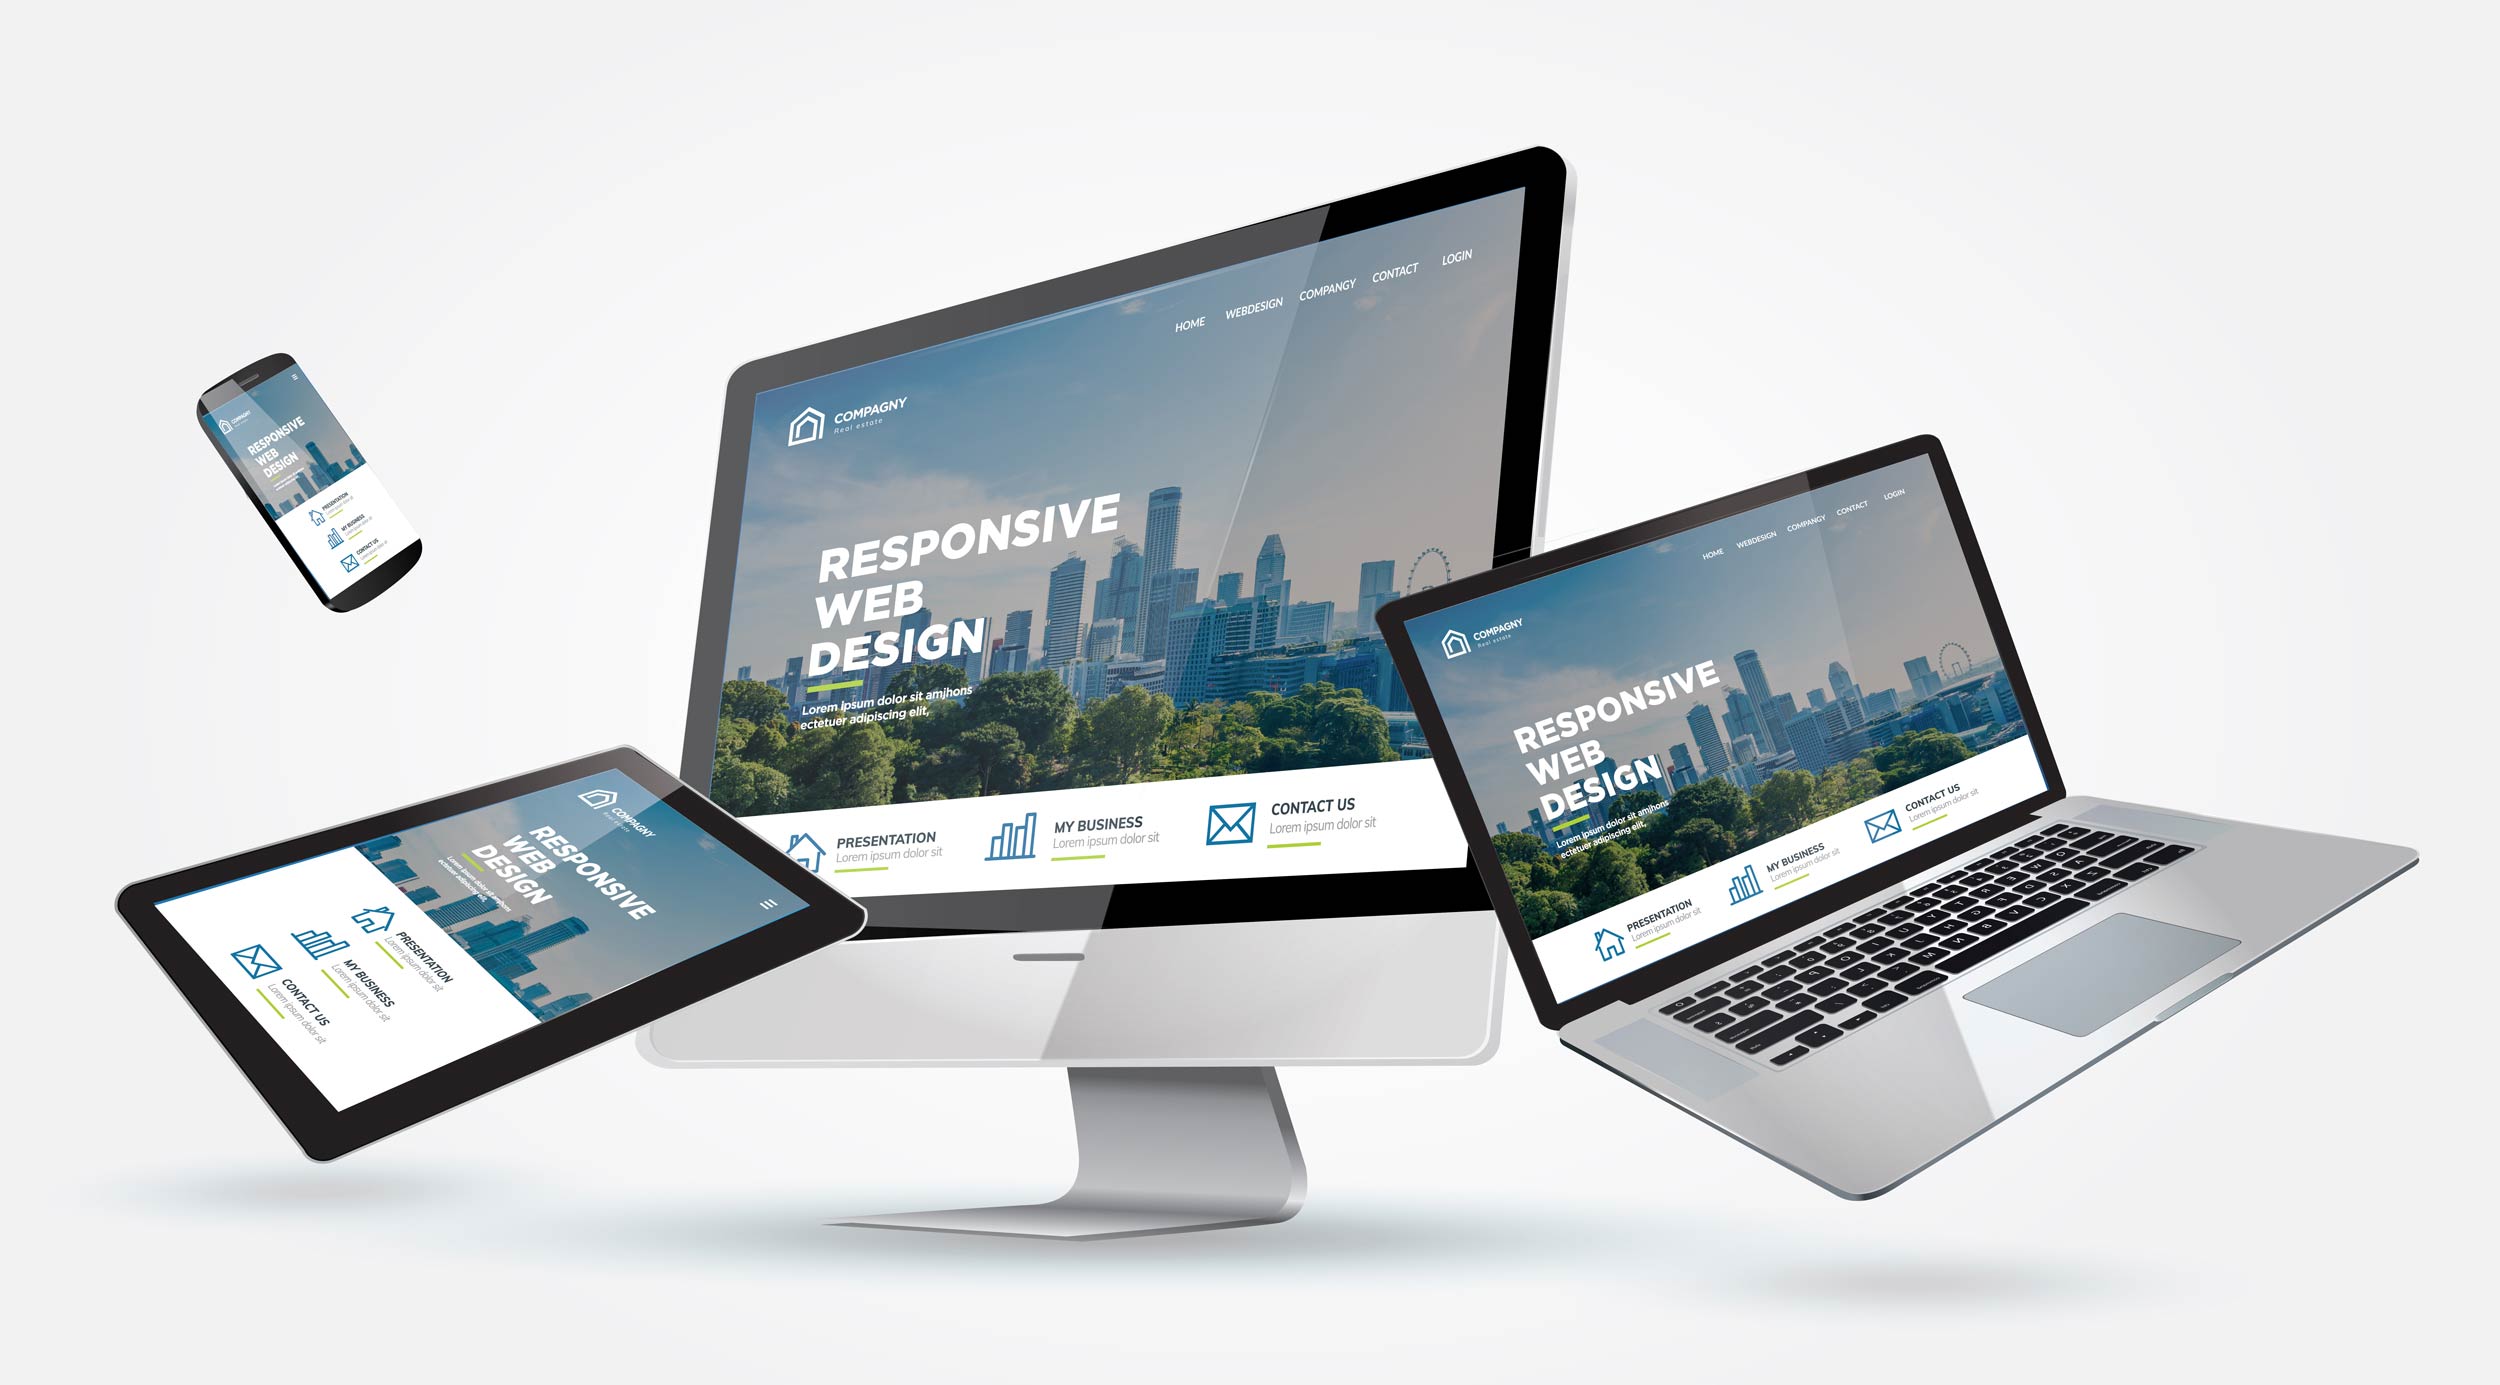 Concept showing Responsive Web Design across multiple devices, Portsmouth at Jazz Creative